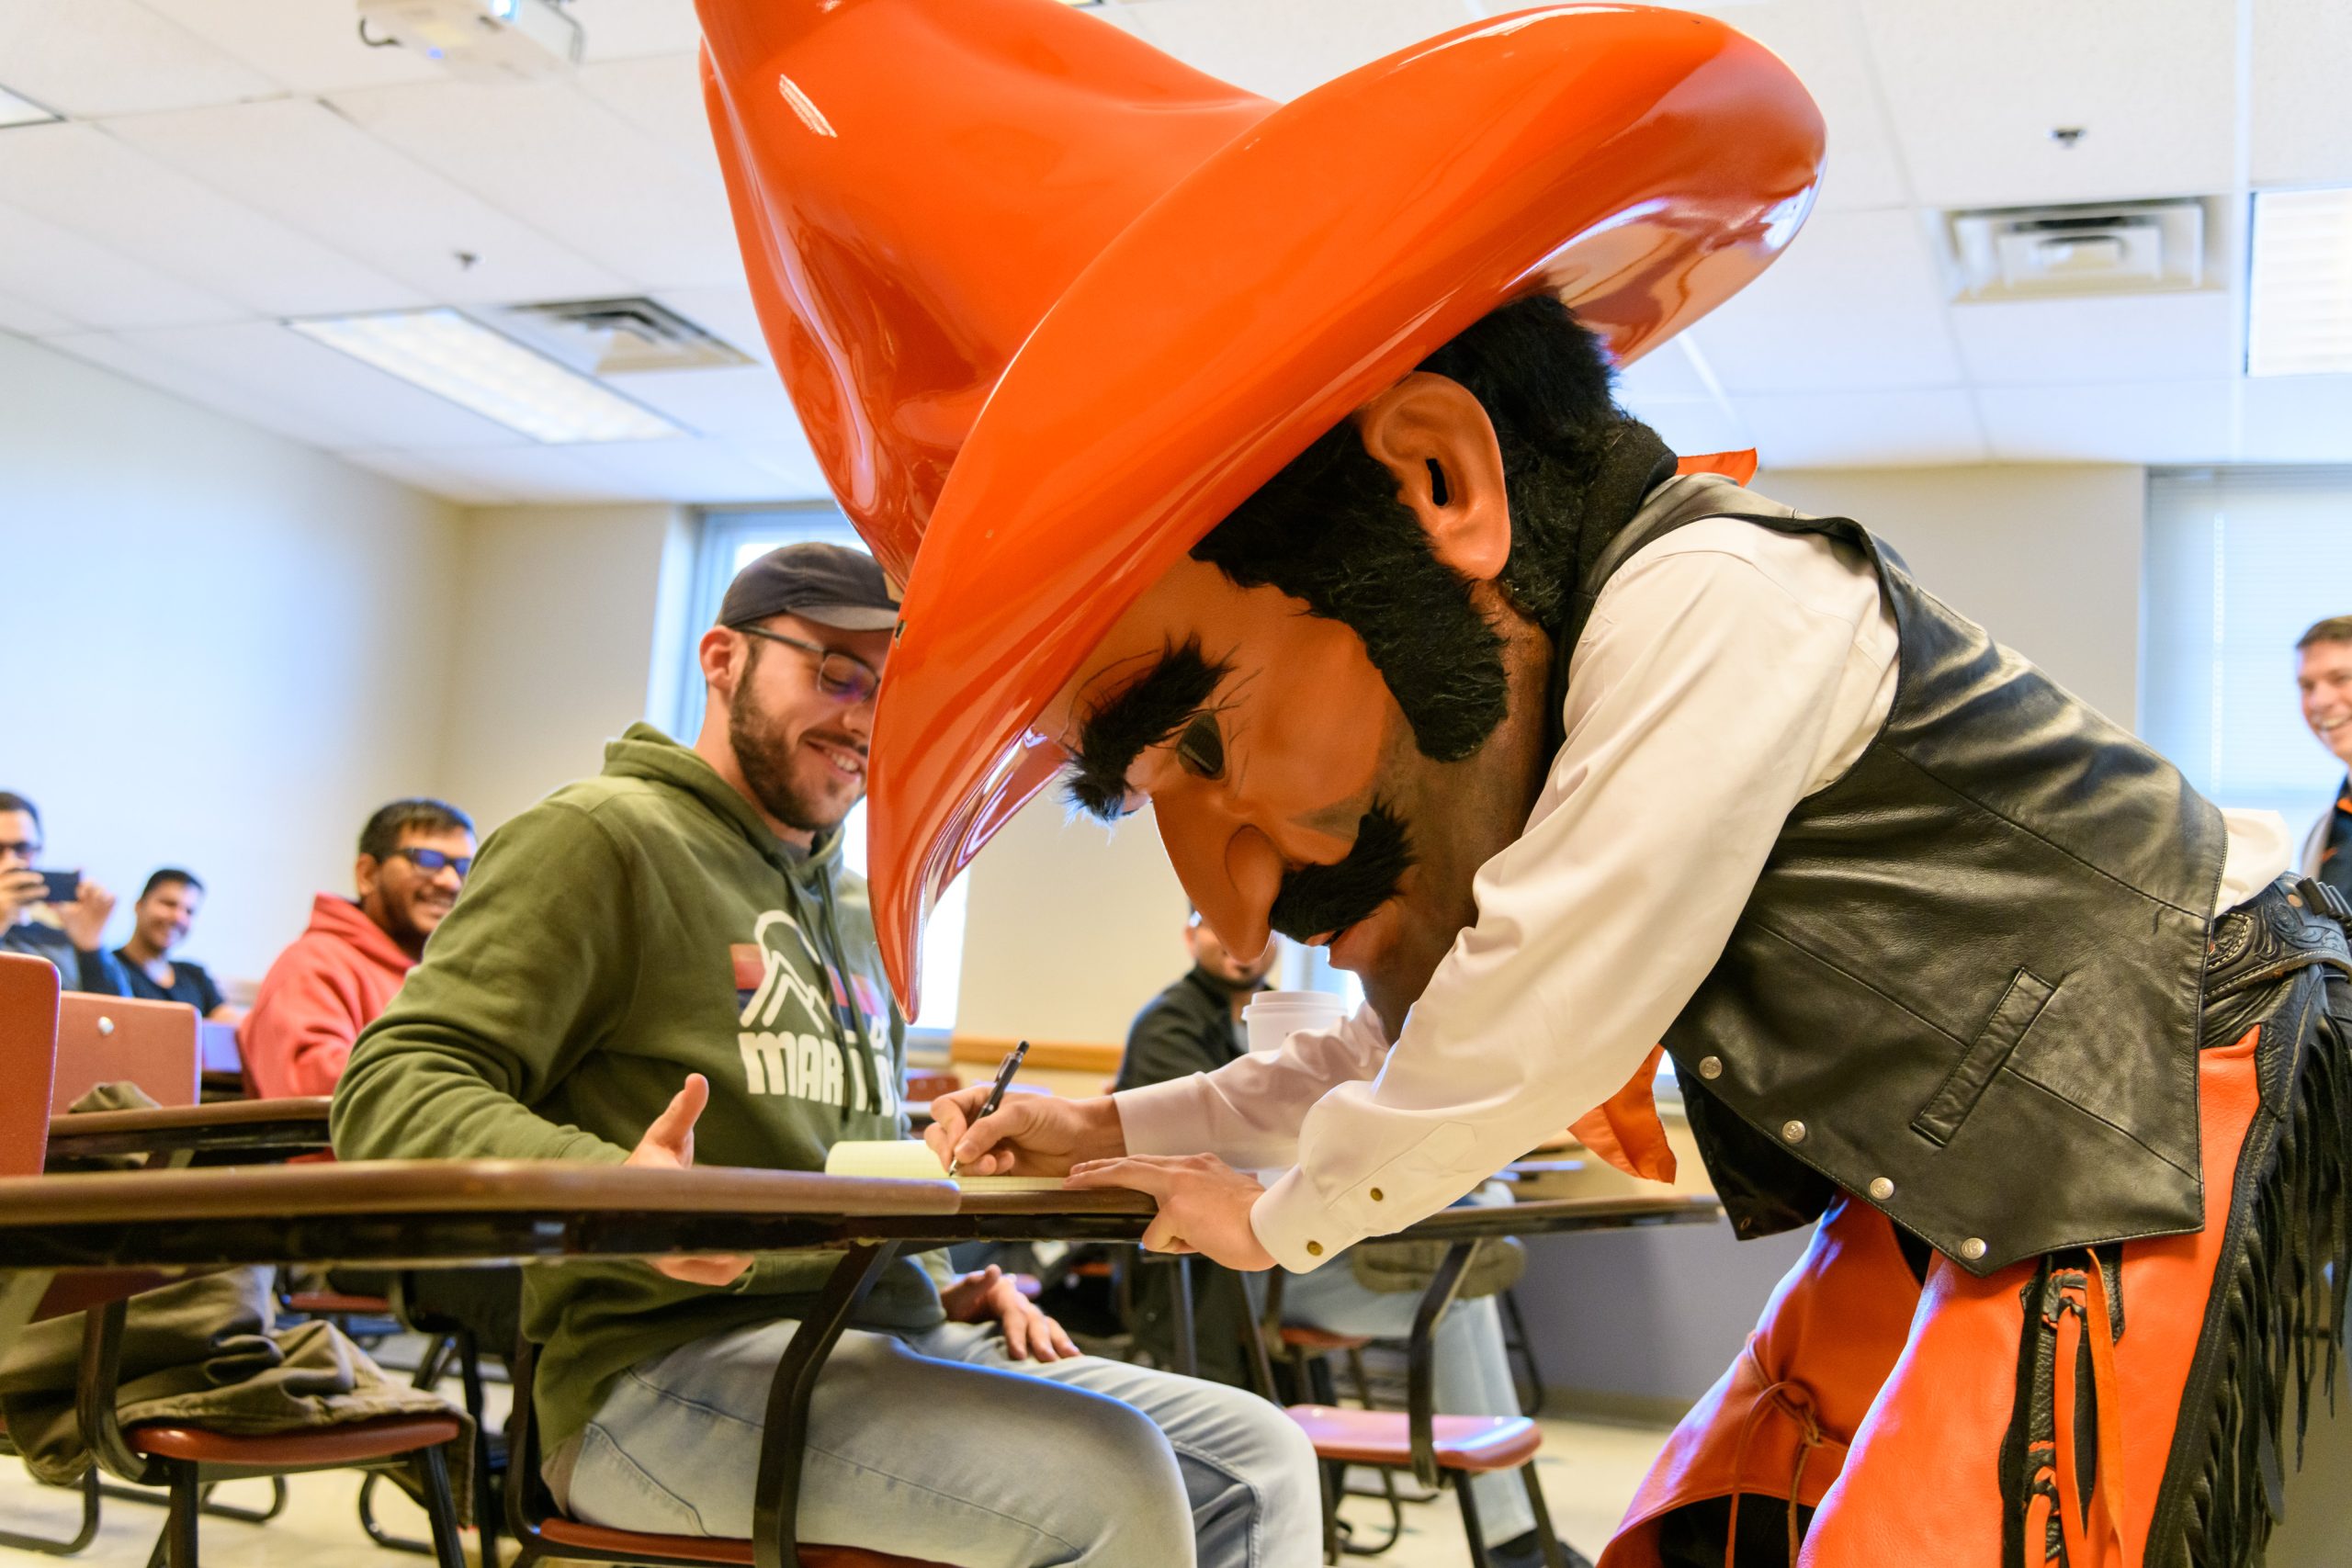 Pistol Pete writes on a paper on a desk in a classroom while standing up.